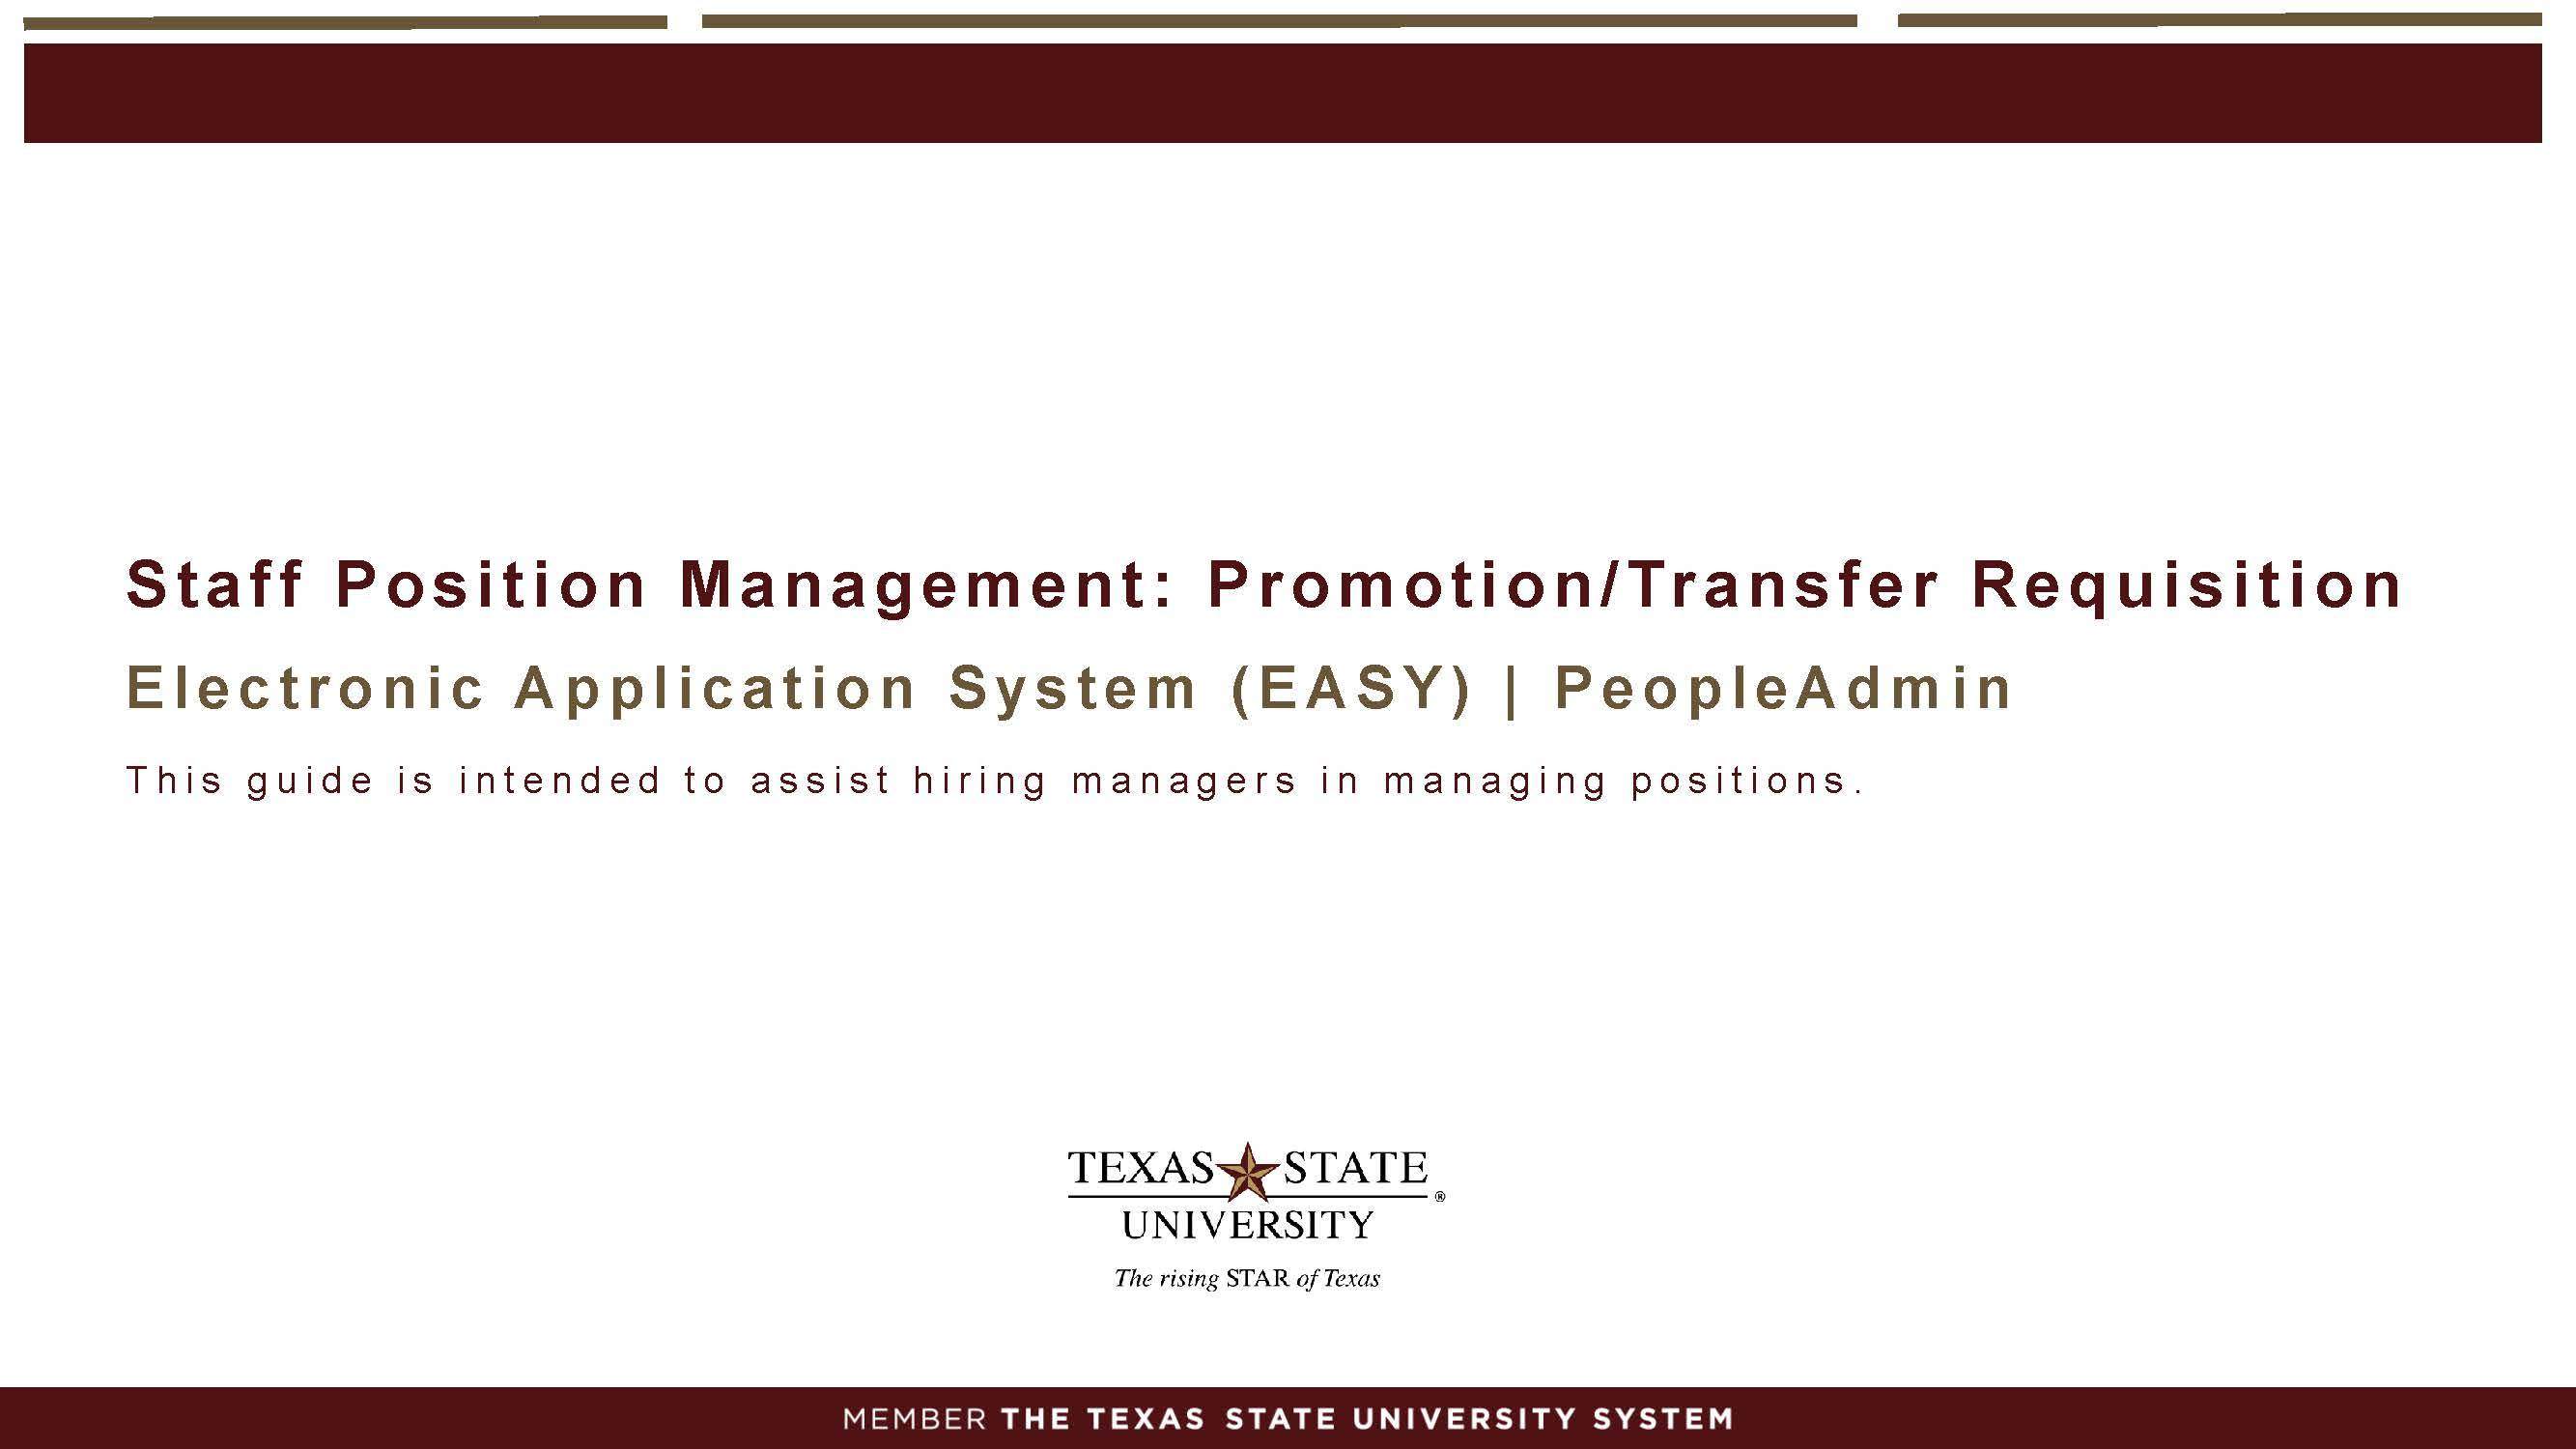 staff position management: Promotion/Transfer Requisition power point